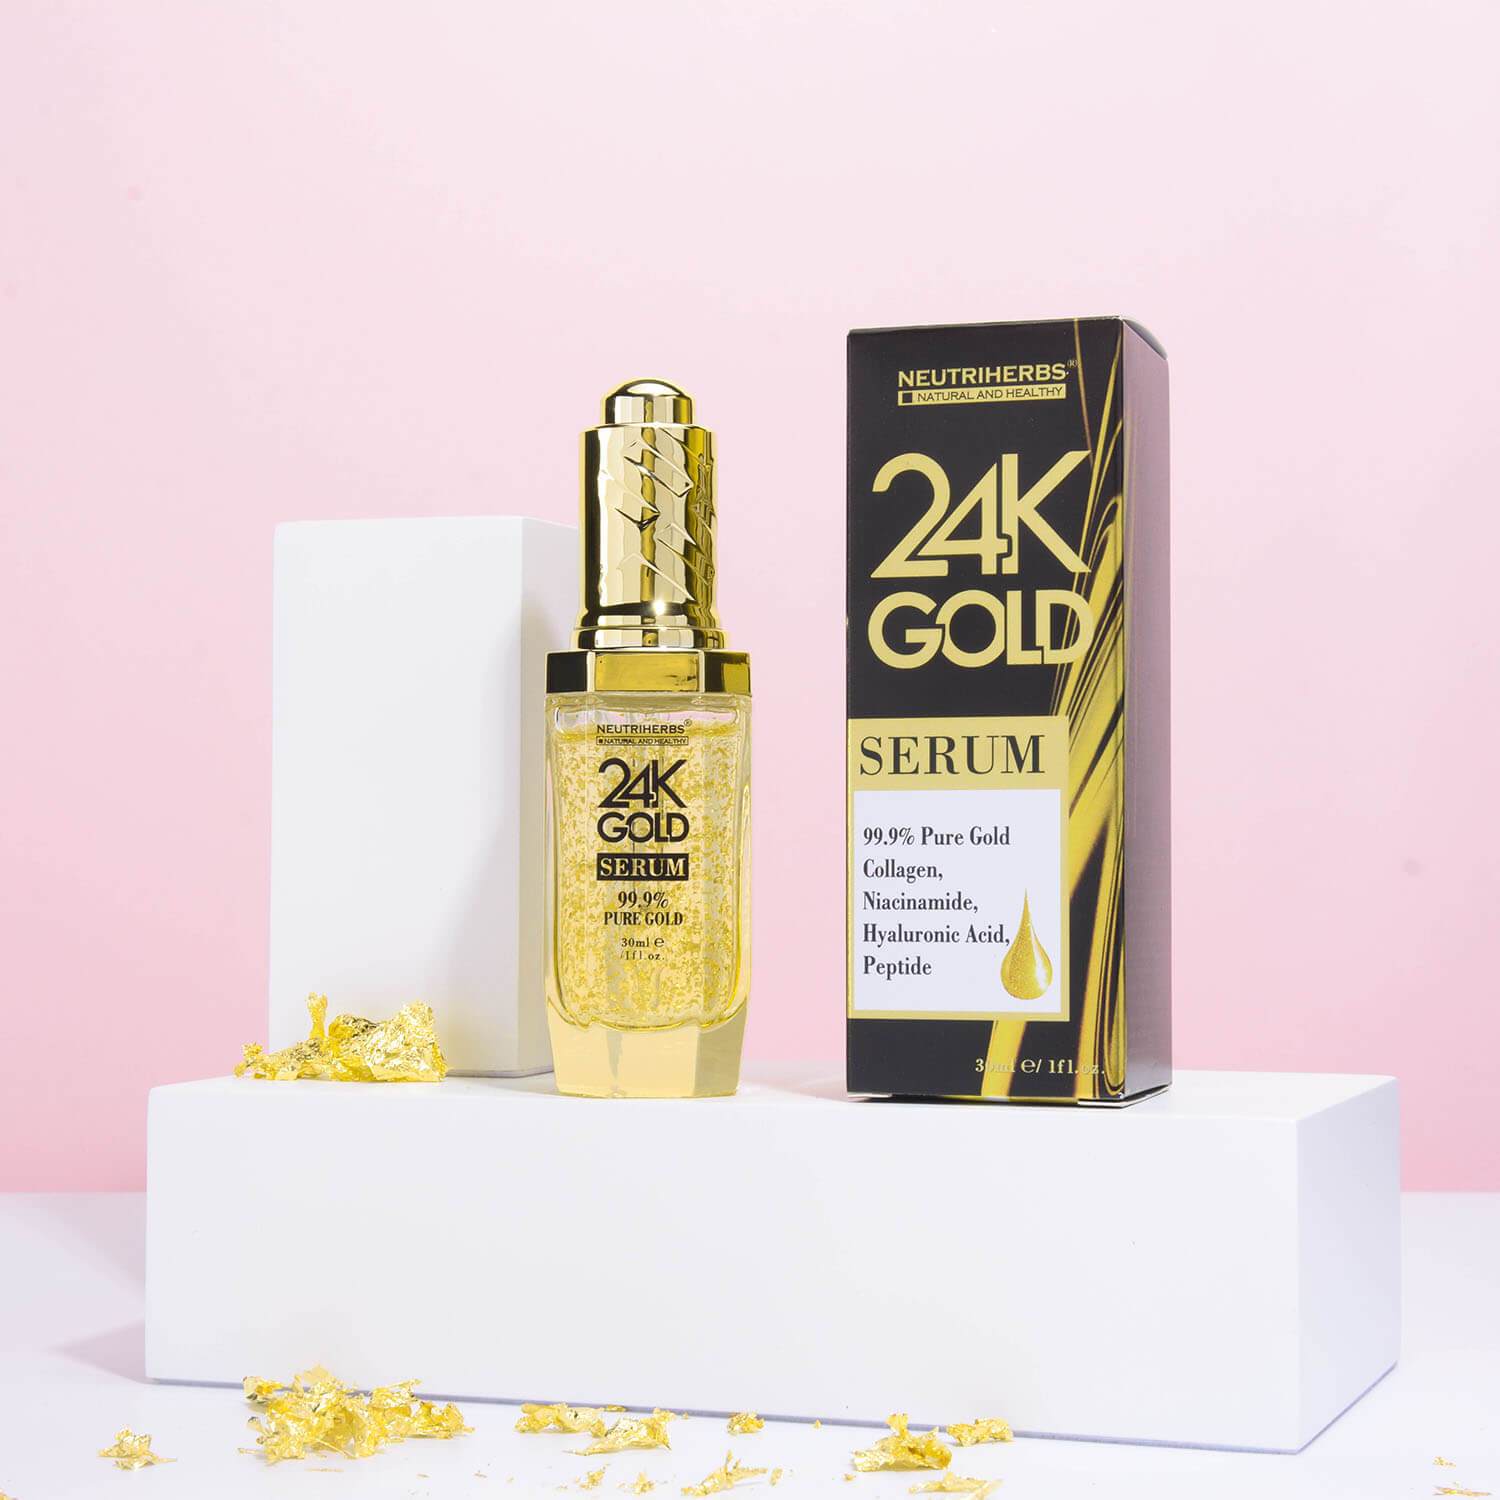 24K Gold Serum contains pure gold